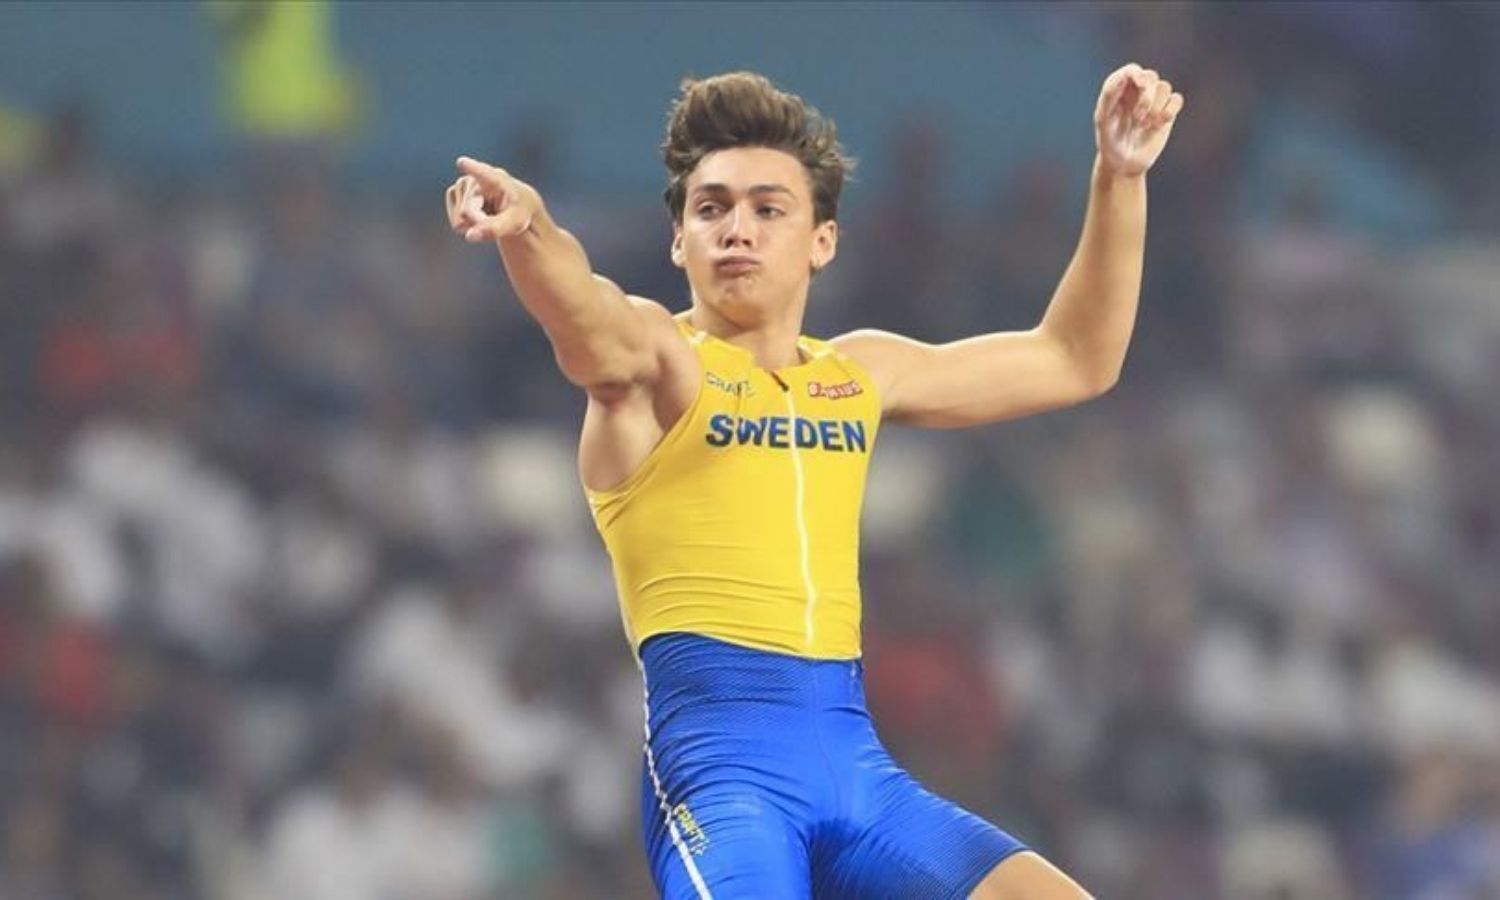 World Athletics Championships: Duplantis claims pole vault title with new world record